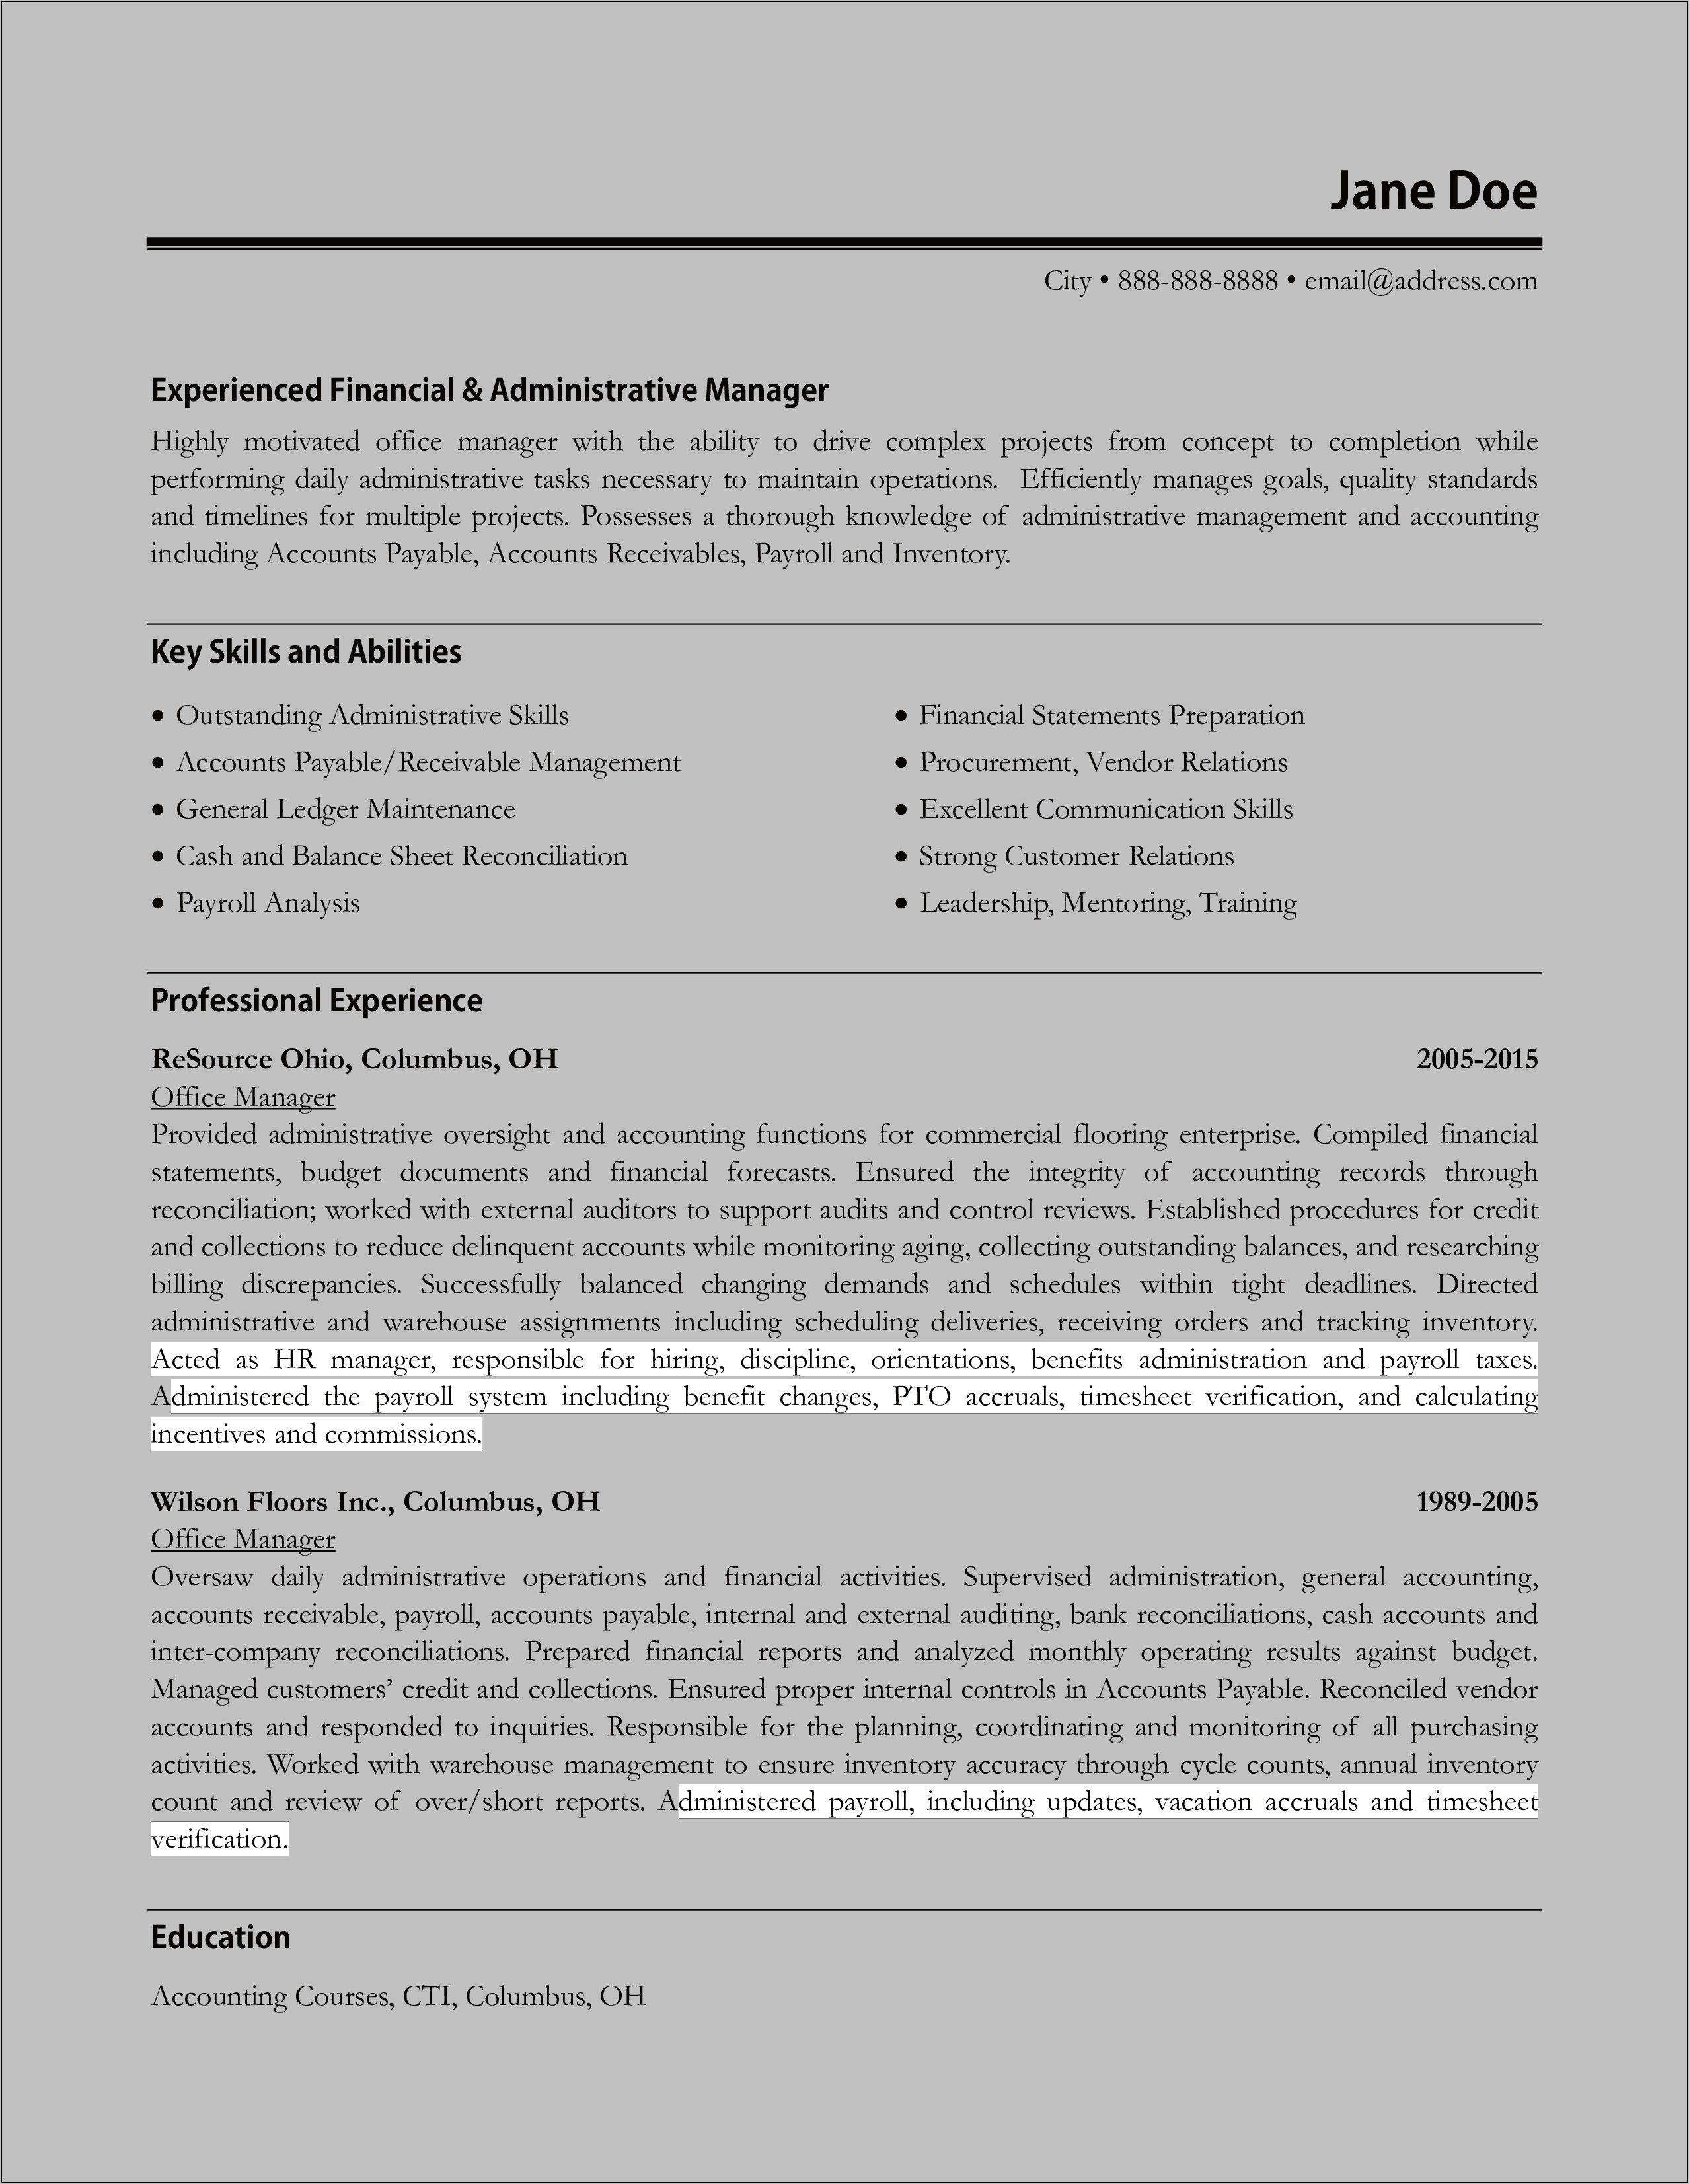 Payroll Acounts Receivable Payable Resume Examples